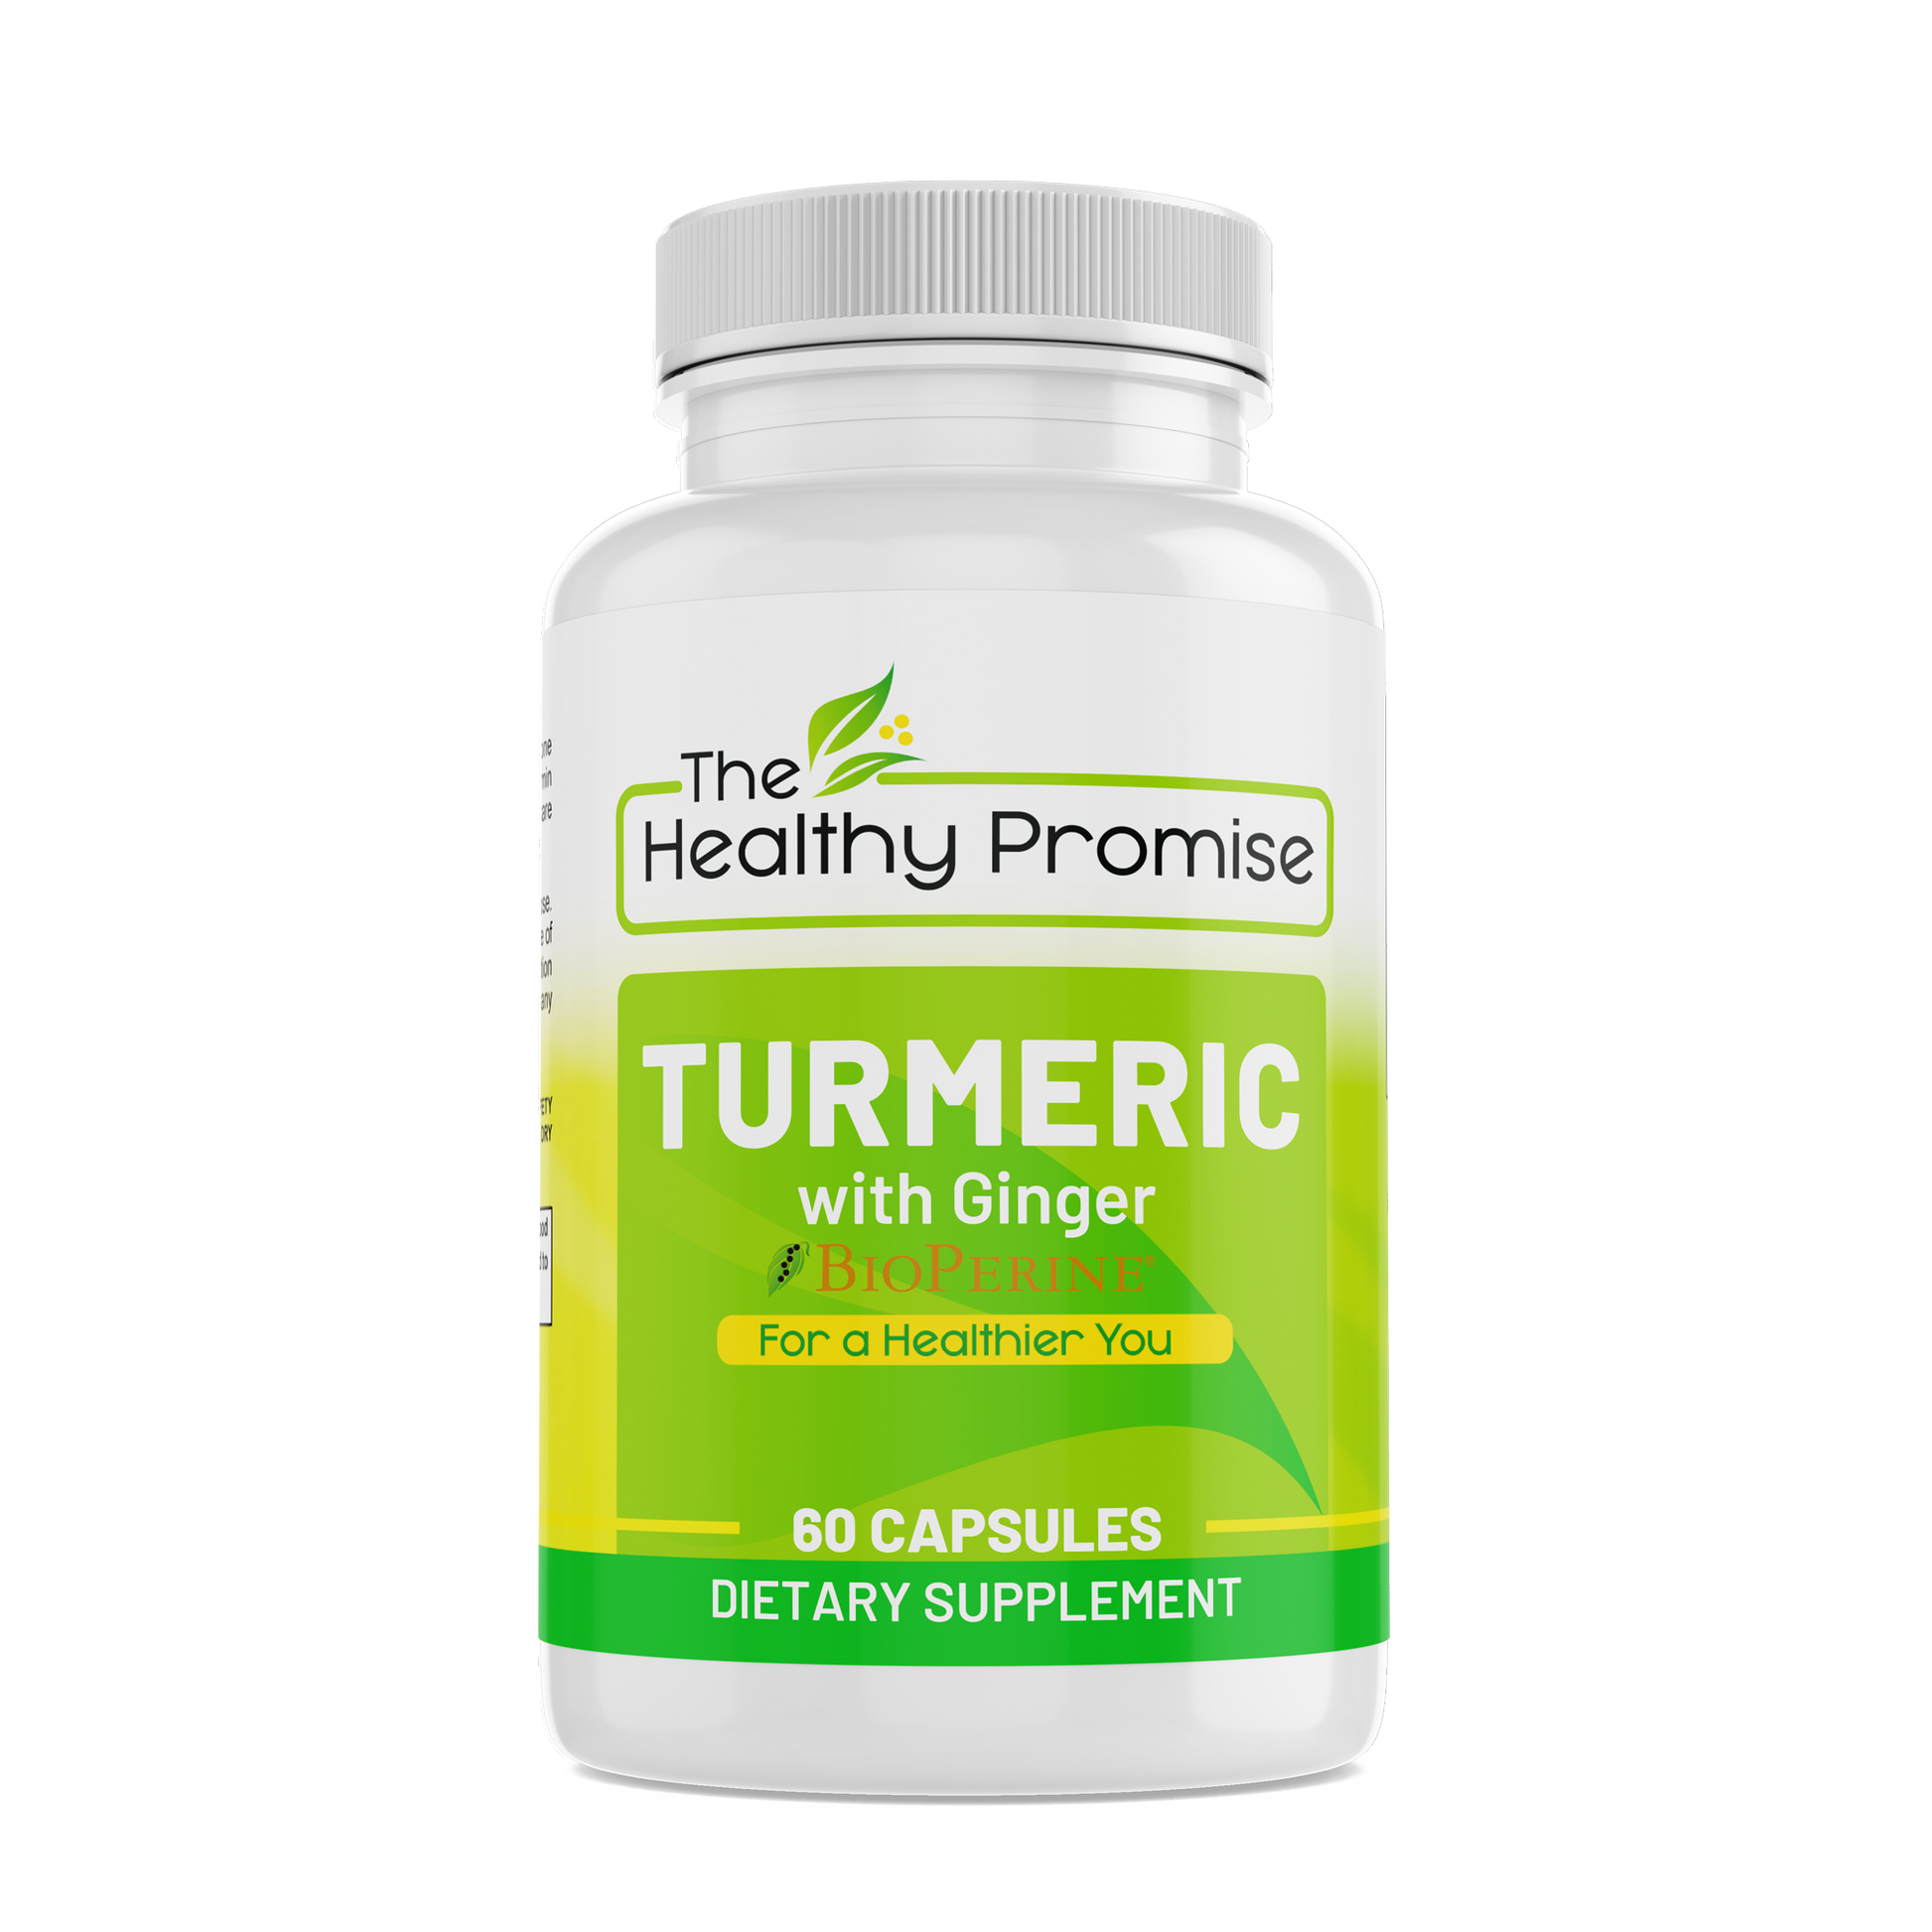 the healthy promise turmeric ginger dietary vitamin supplement bottle front view